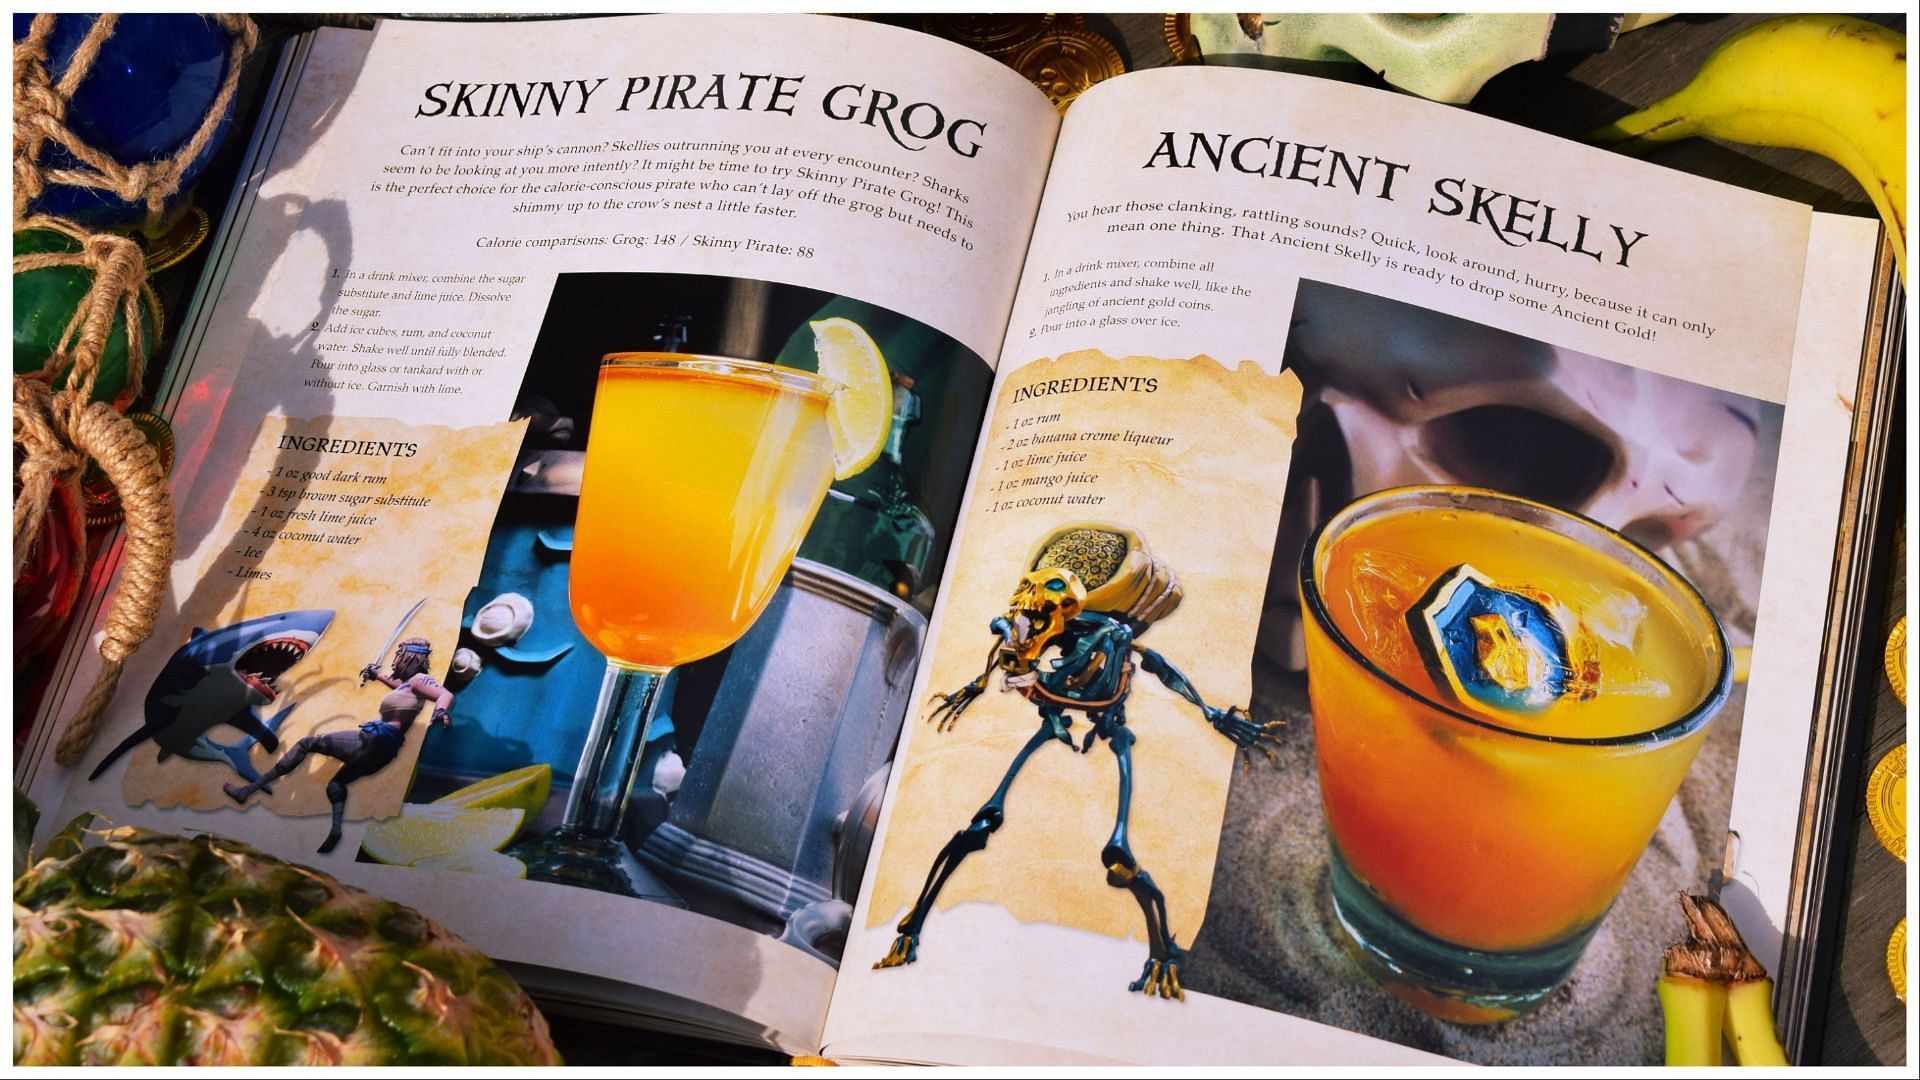 Some of the recipes in the cookbook (Image via Rare)